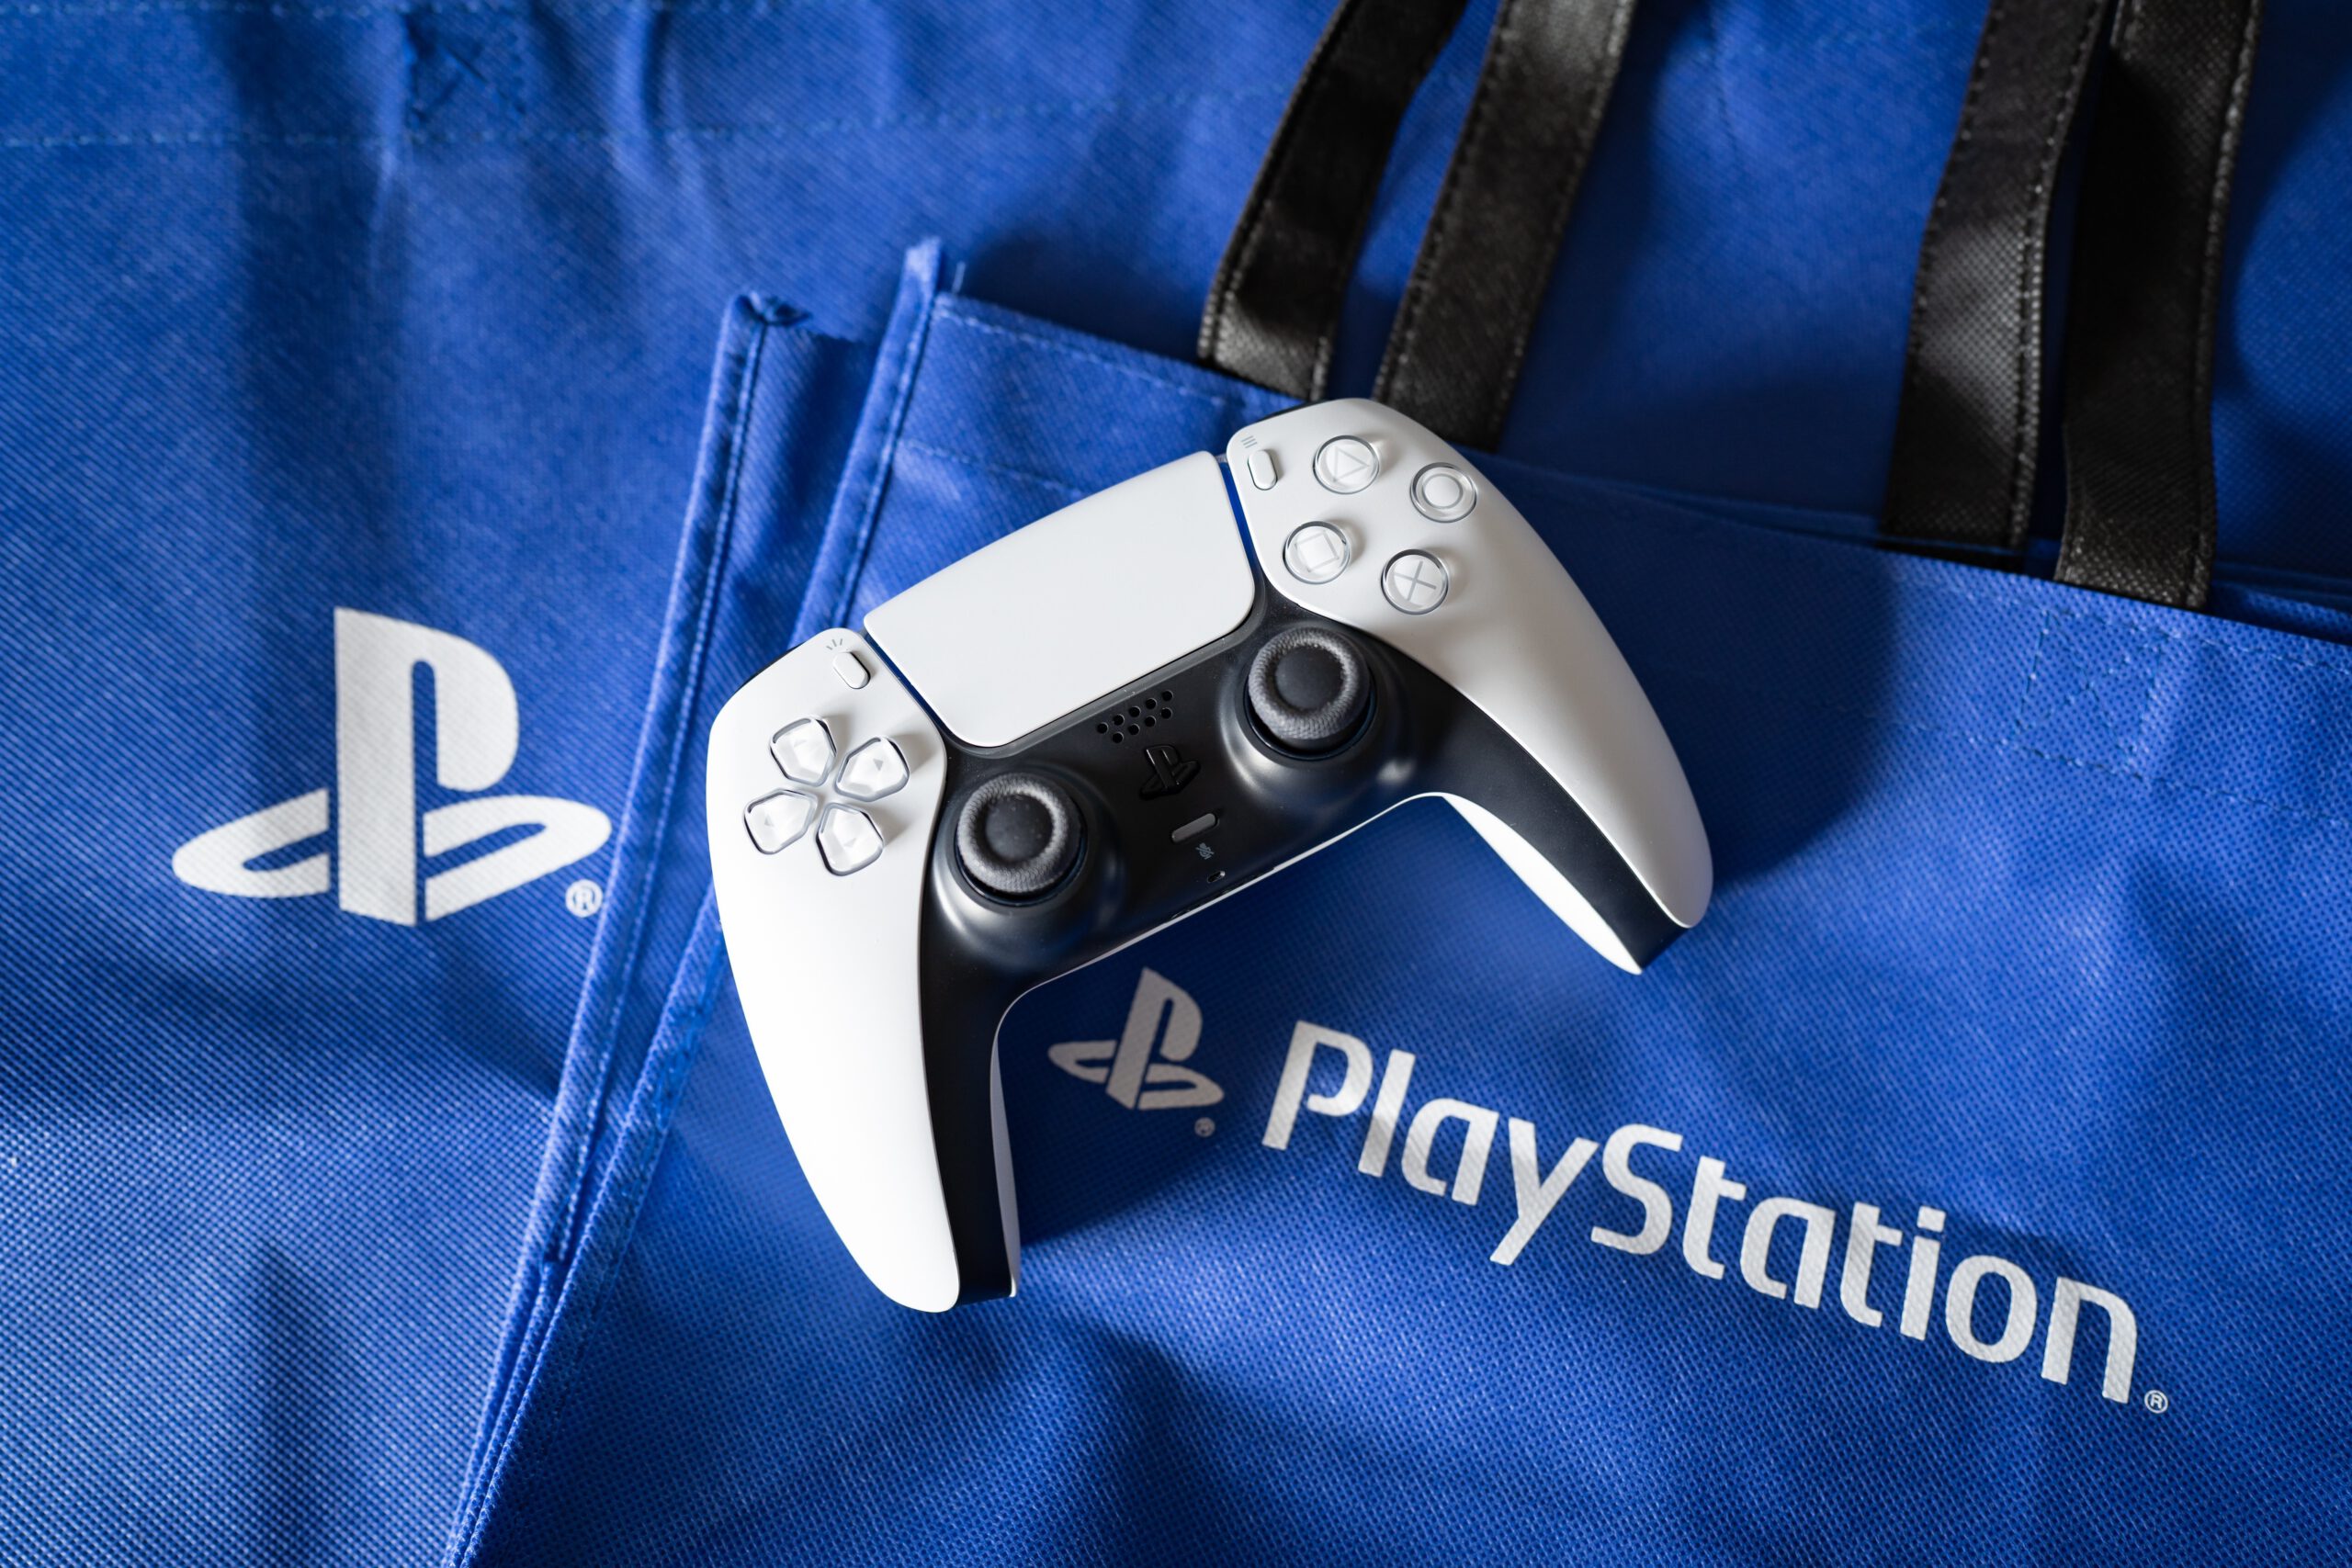 Playstation 5's DualSense game controller and Playstation logo.